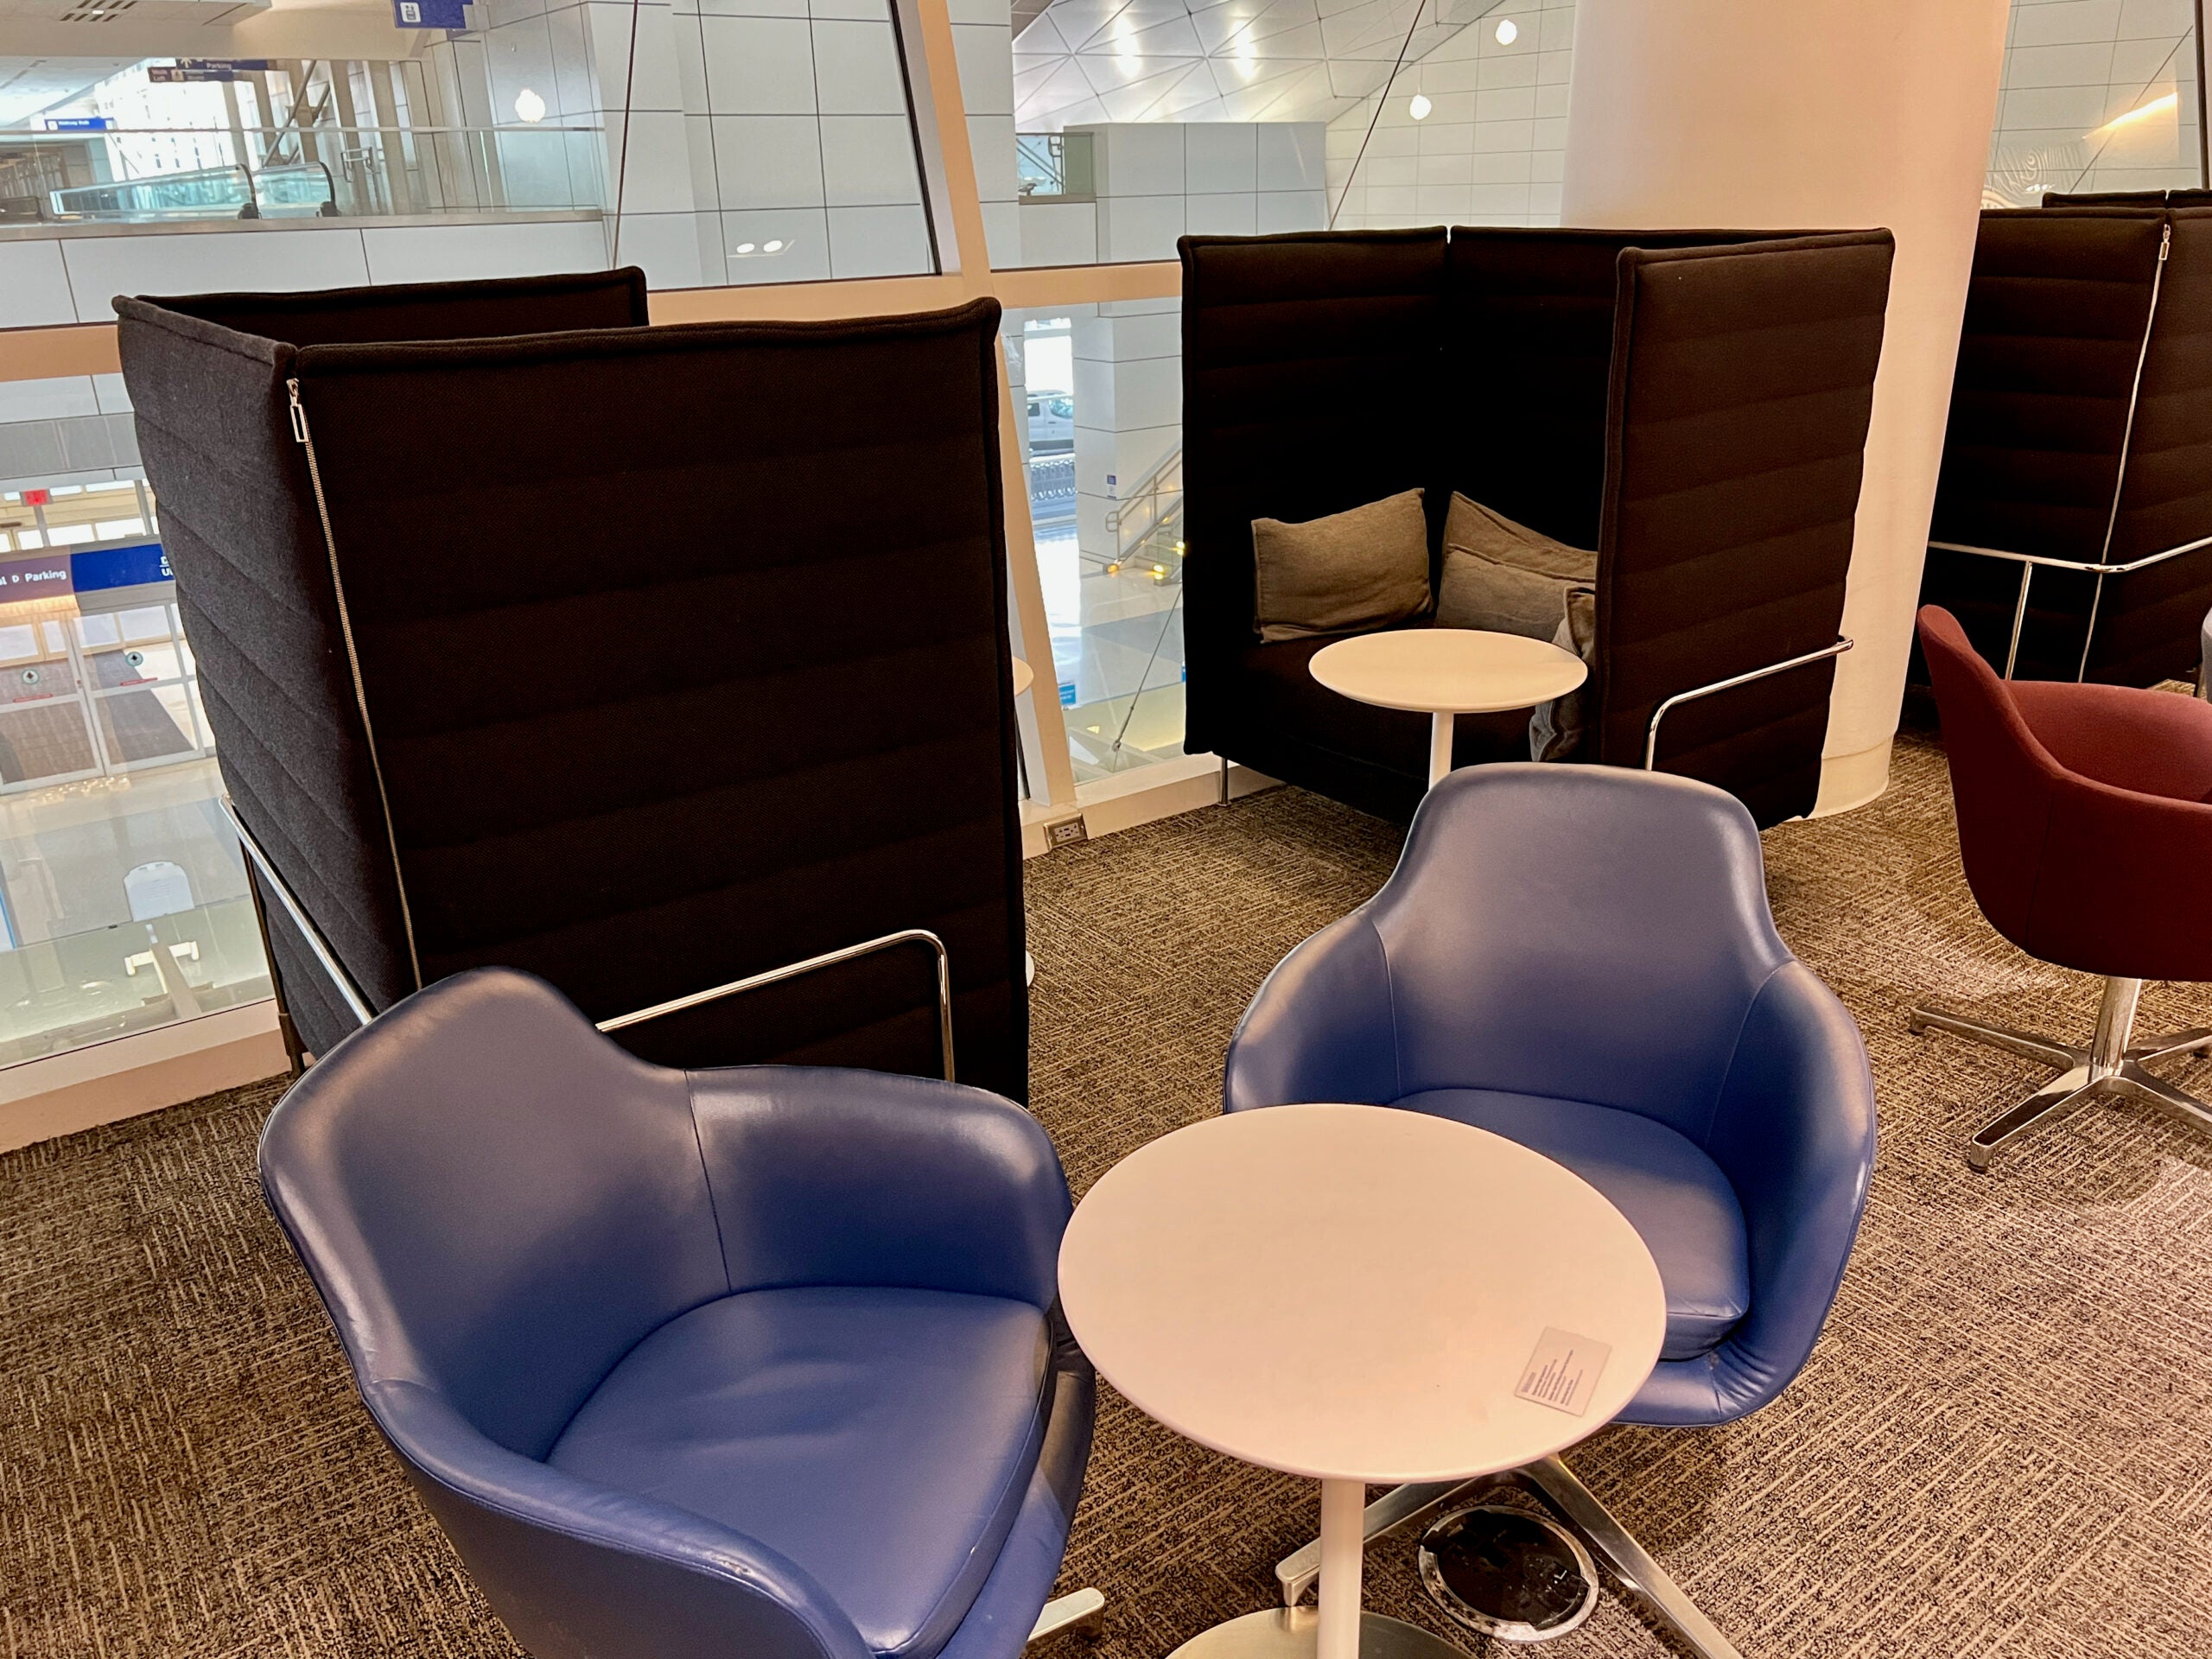 Seating area at Amex lounge DFW